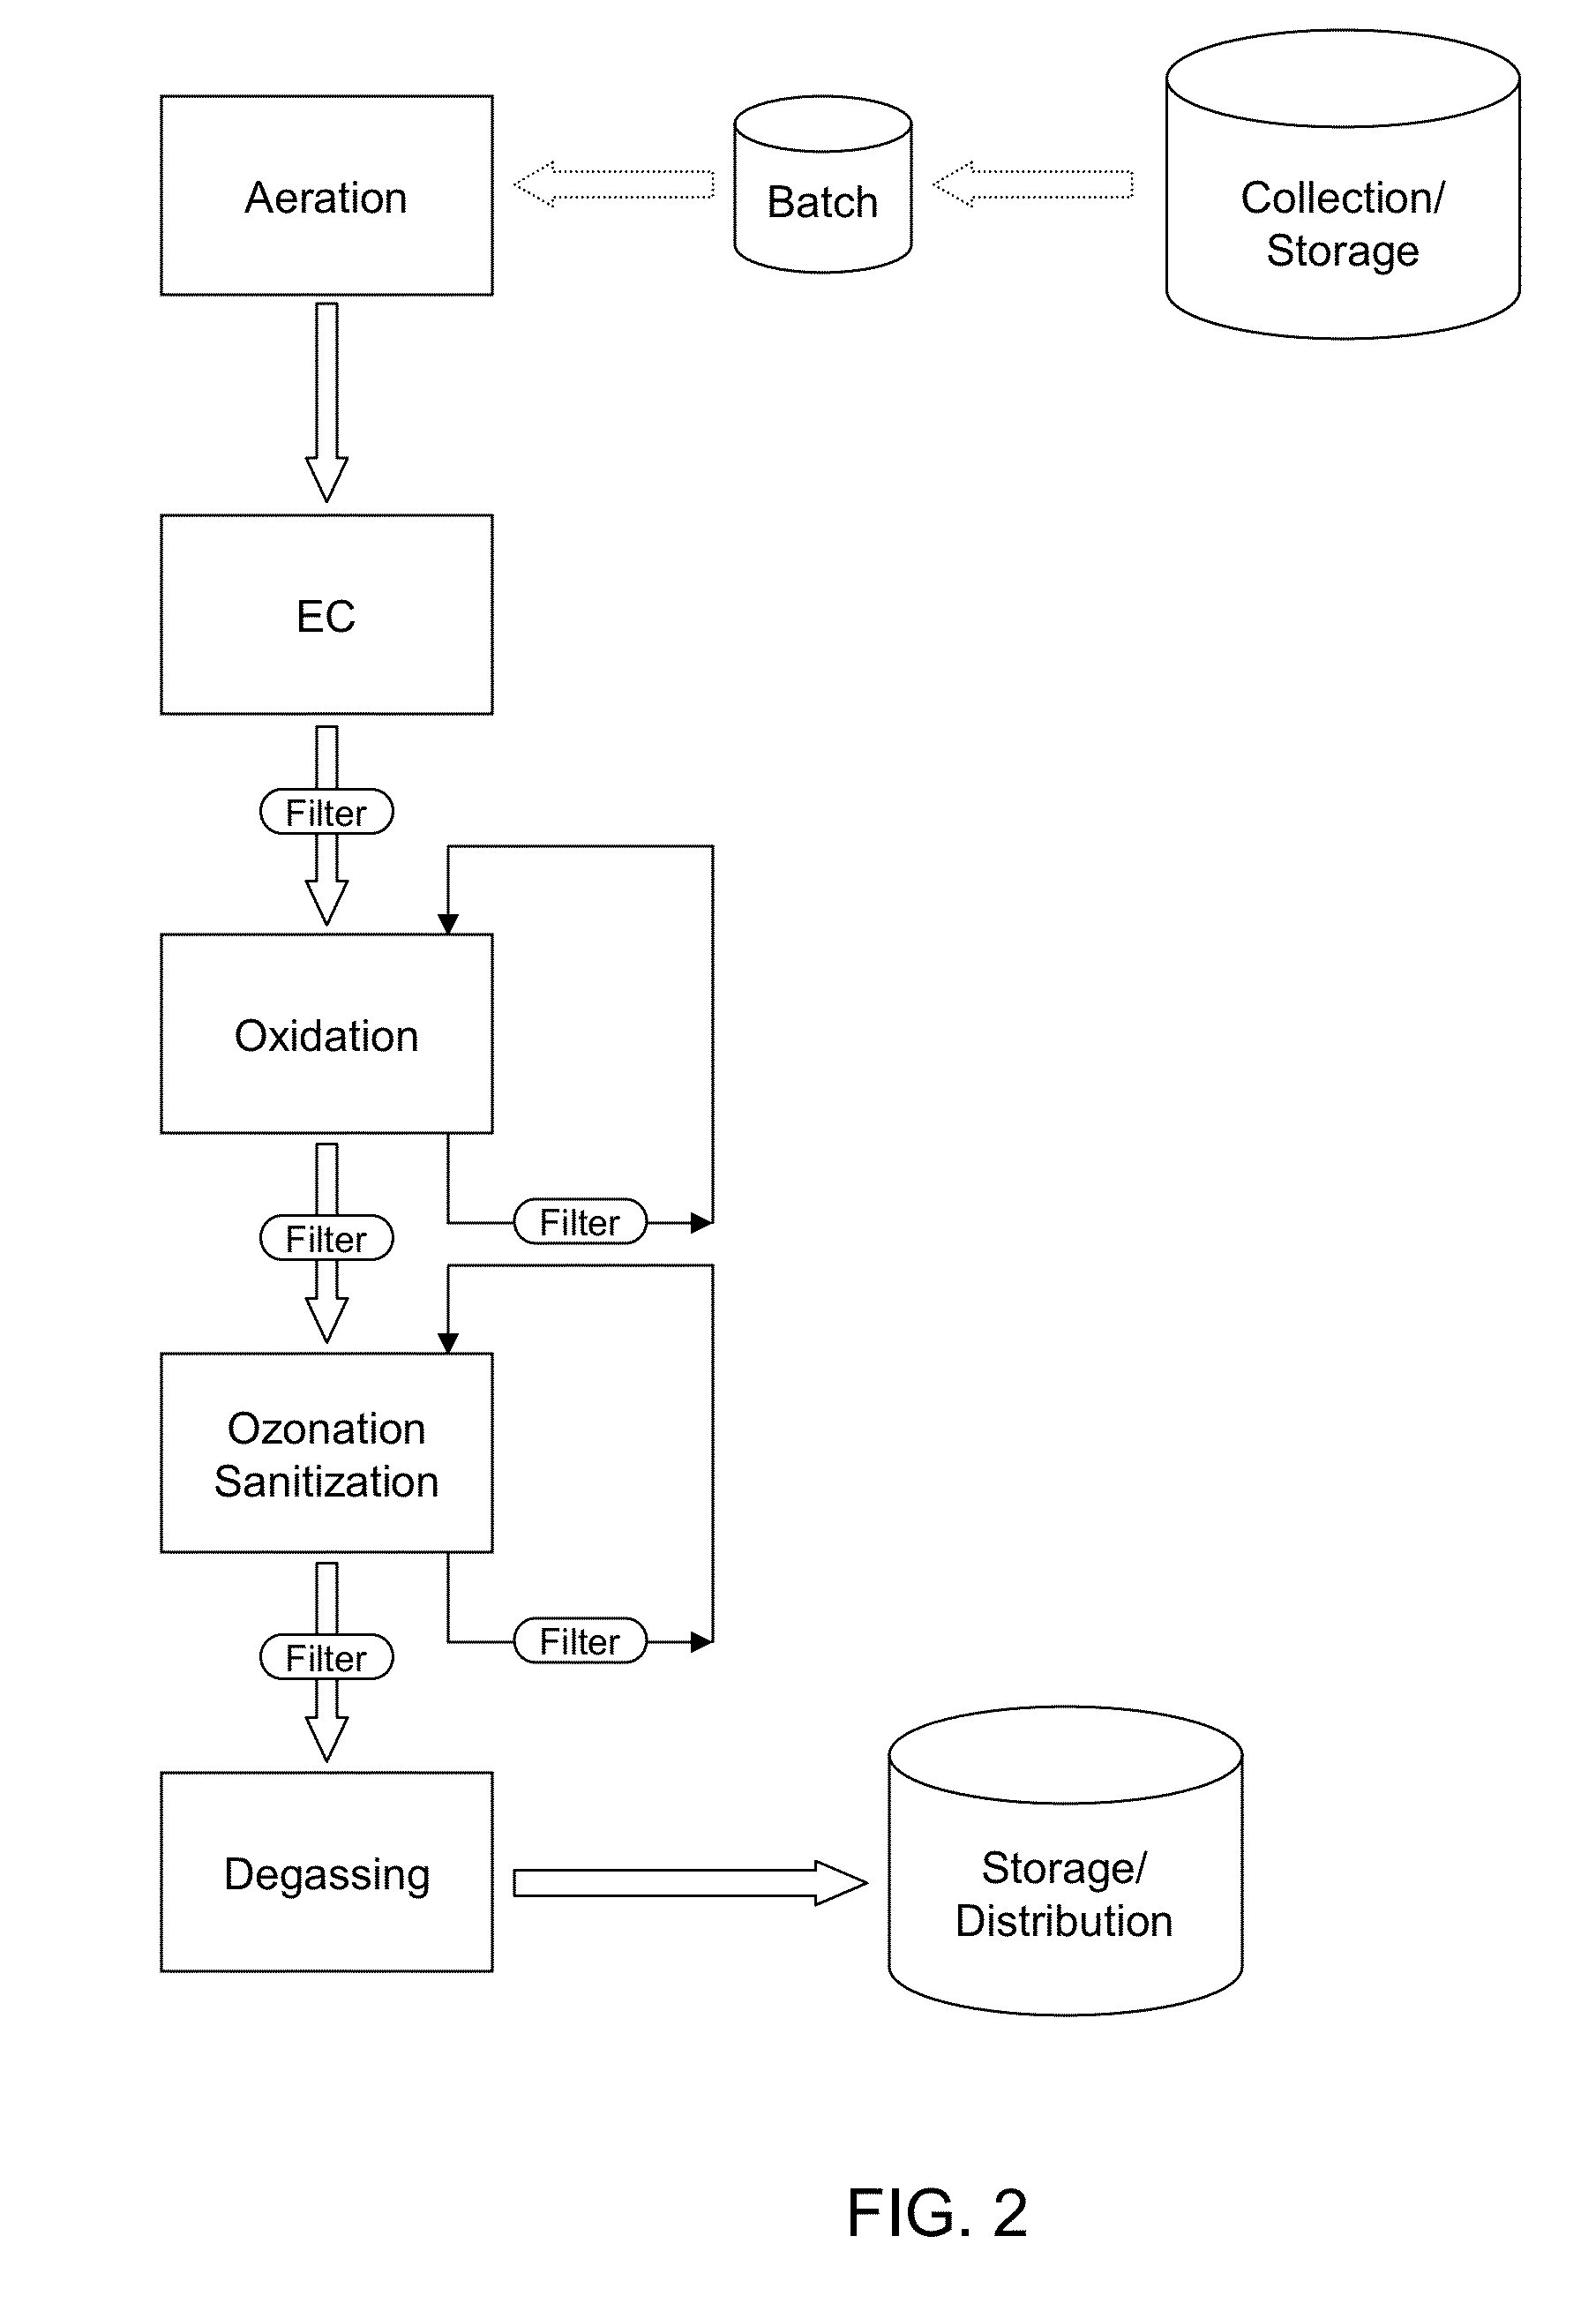 System and Methods for Wastewater and Produced Water Cleaning and Reclamation